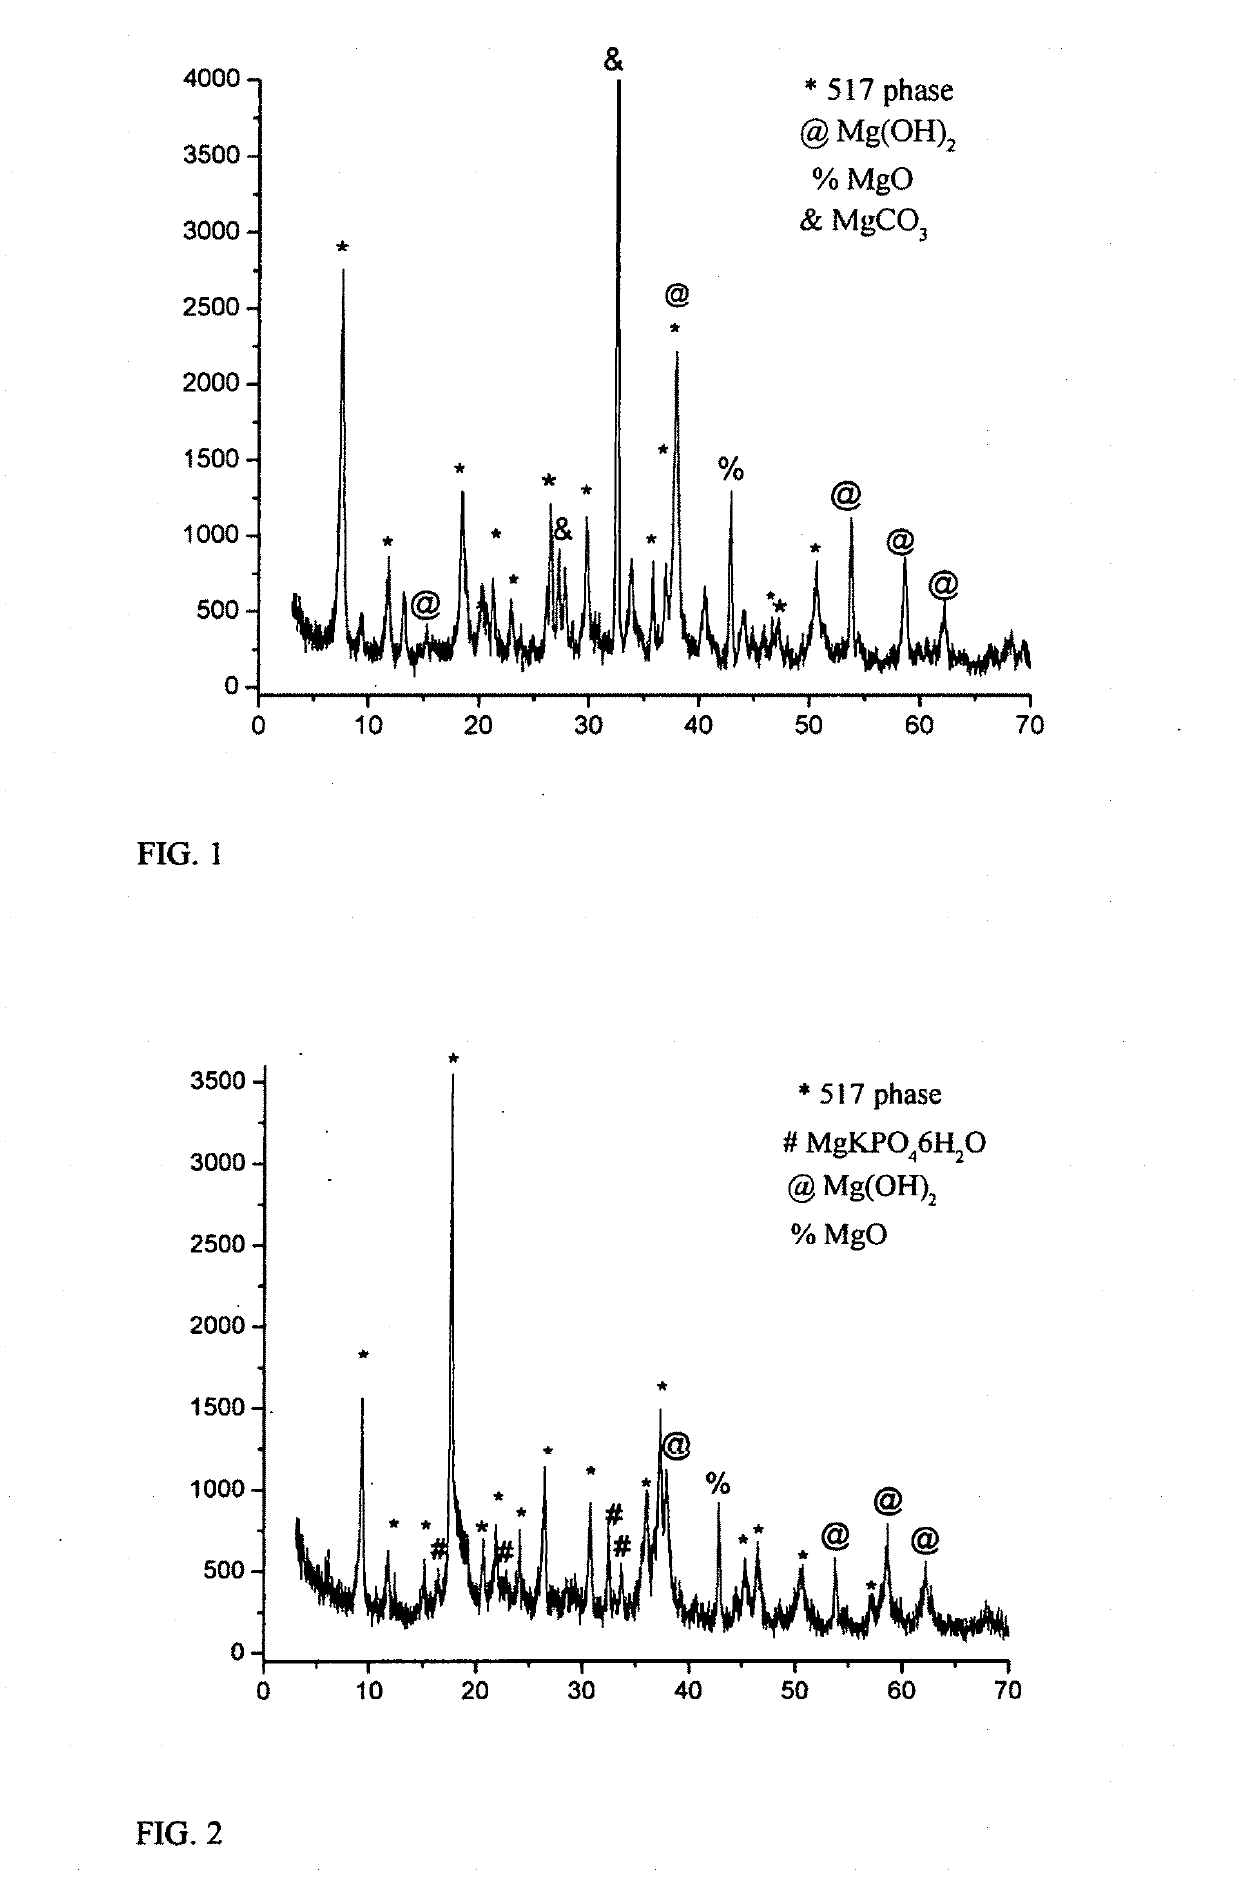 Method of treating magnesium oxysulfate or magnesium oxychloride article with water soluble phosphate solution